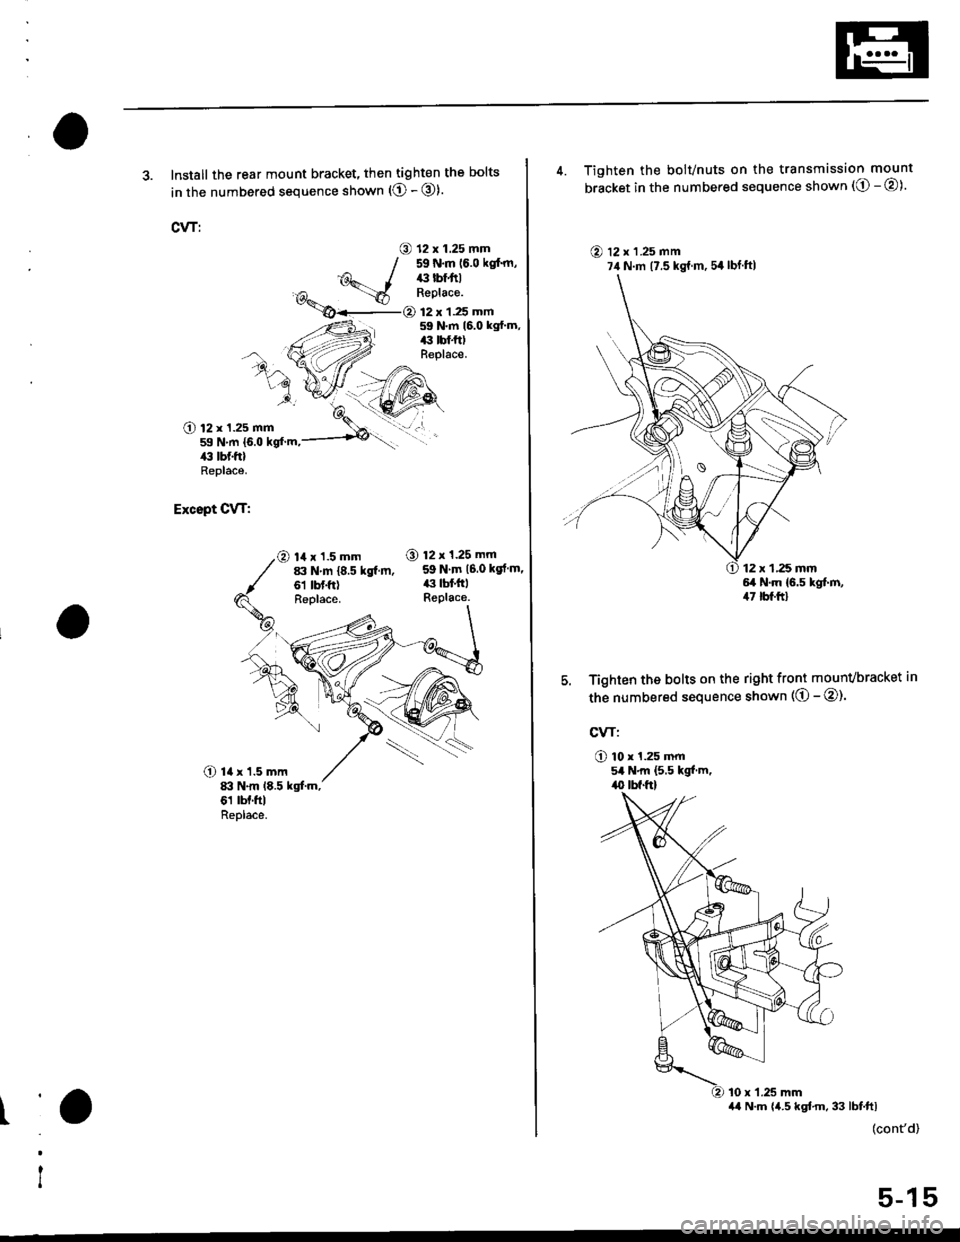 HONDA CIVIC 1999 6.G Workshop Manual 3. Install the rear mount bracket, then tighten the bolts
in the numbered sequence shown (O - @).
CVT:
O 12 x 1.25 mm59 N.m (6.0 kglm,ilil lbf ftlReplace.
12 x 1.25 mm59 N.m 16.0 kgfm,|:r tbf.tt)Rep